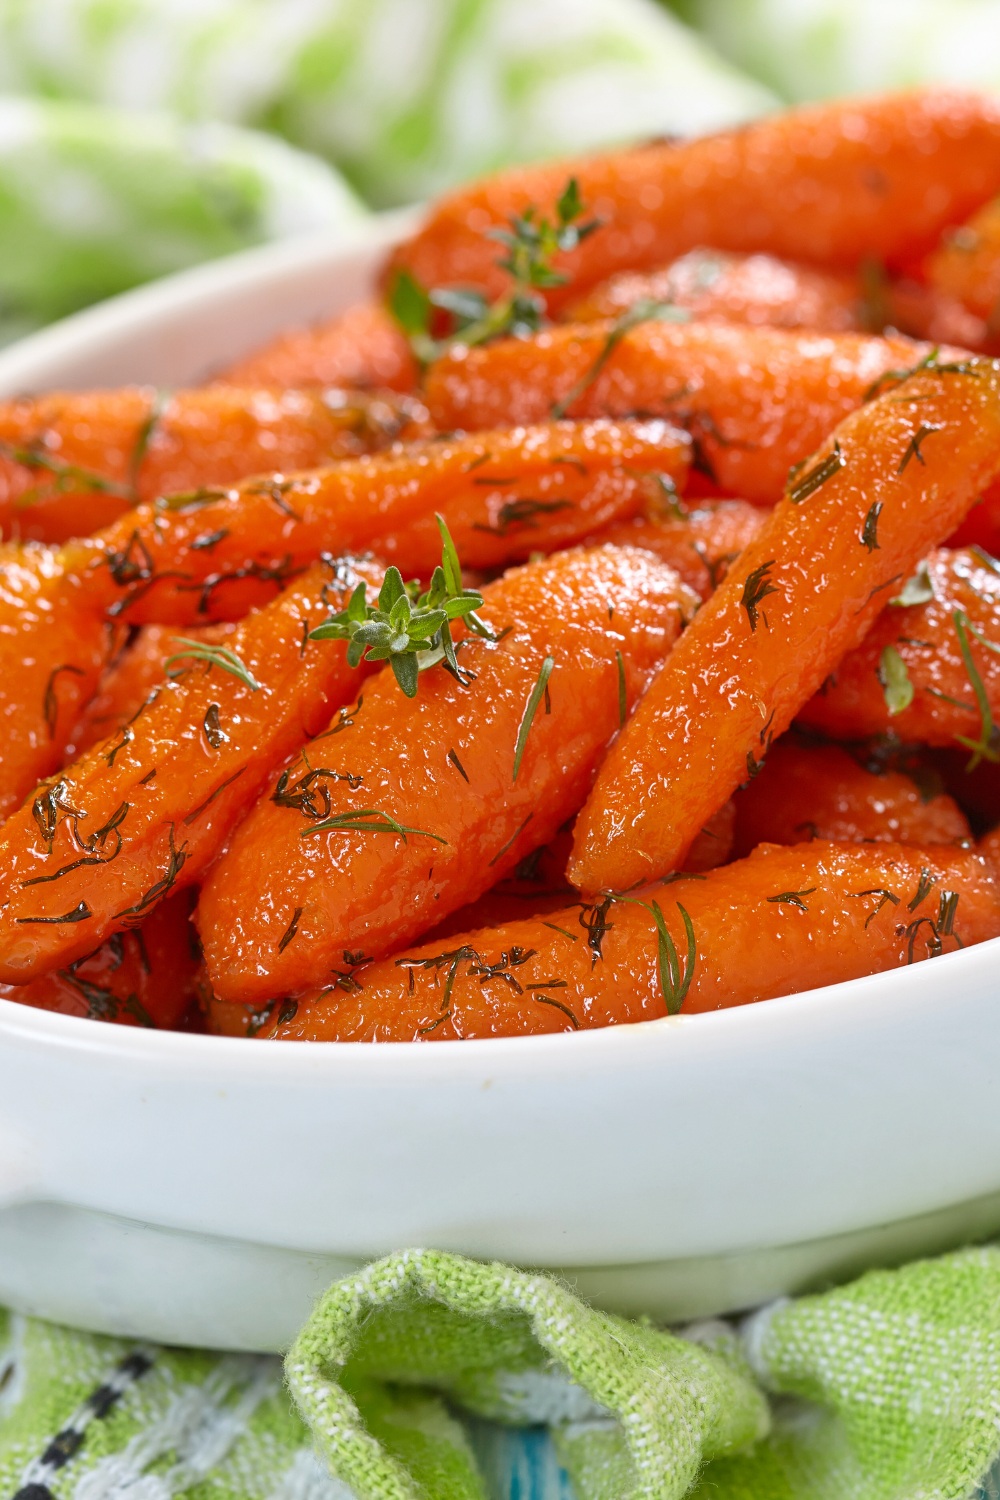 Glazed orange slow cooker carrots garnished with thyme in a white dish.